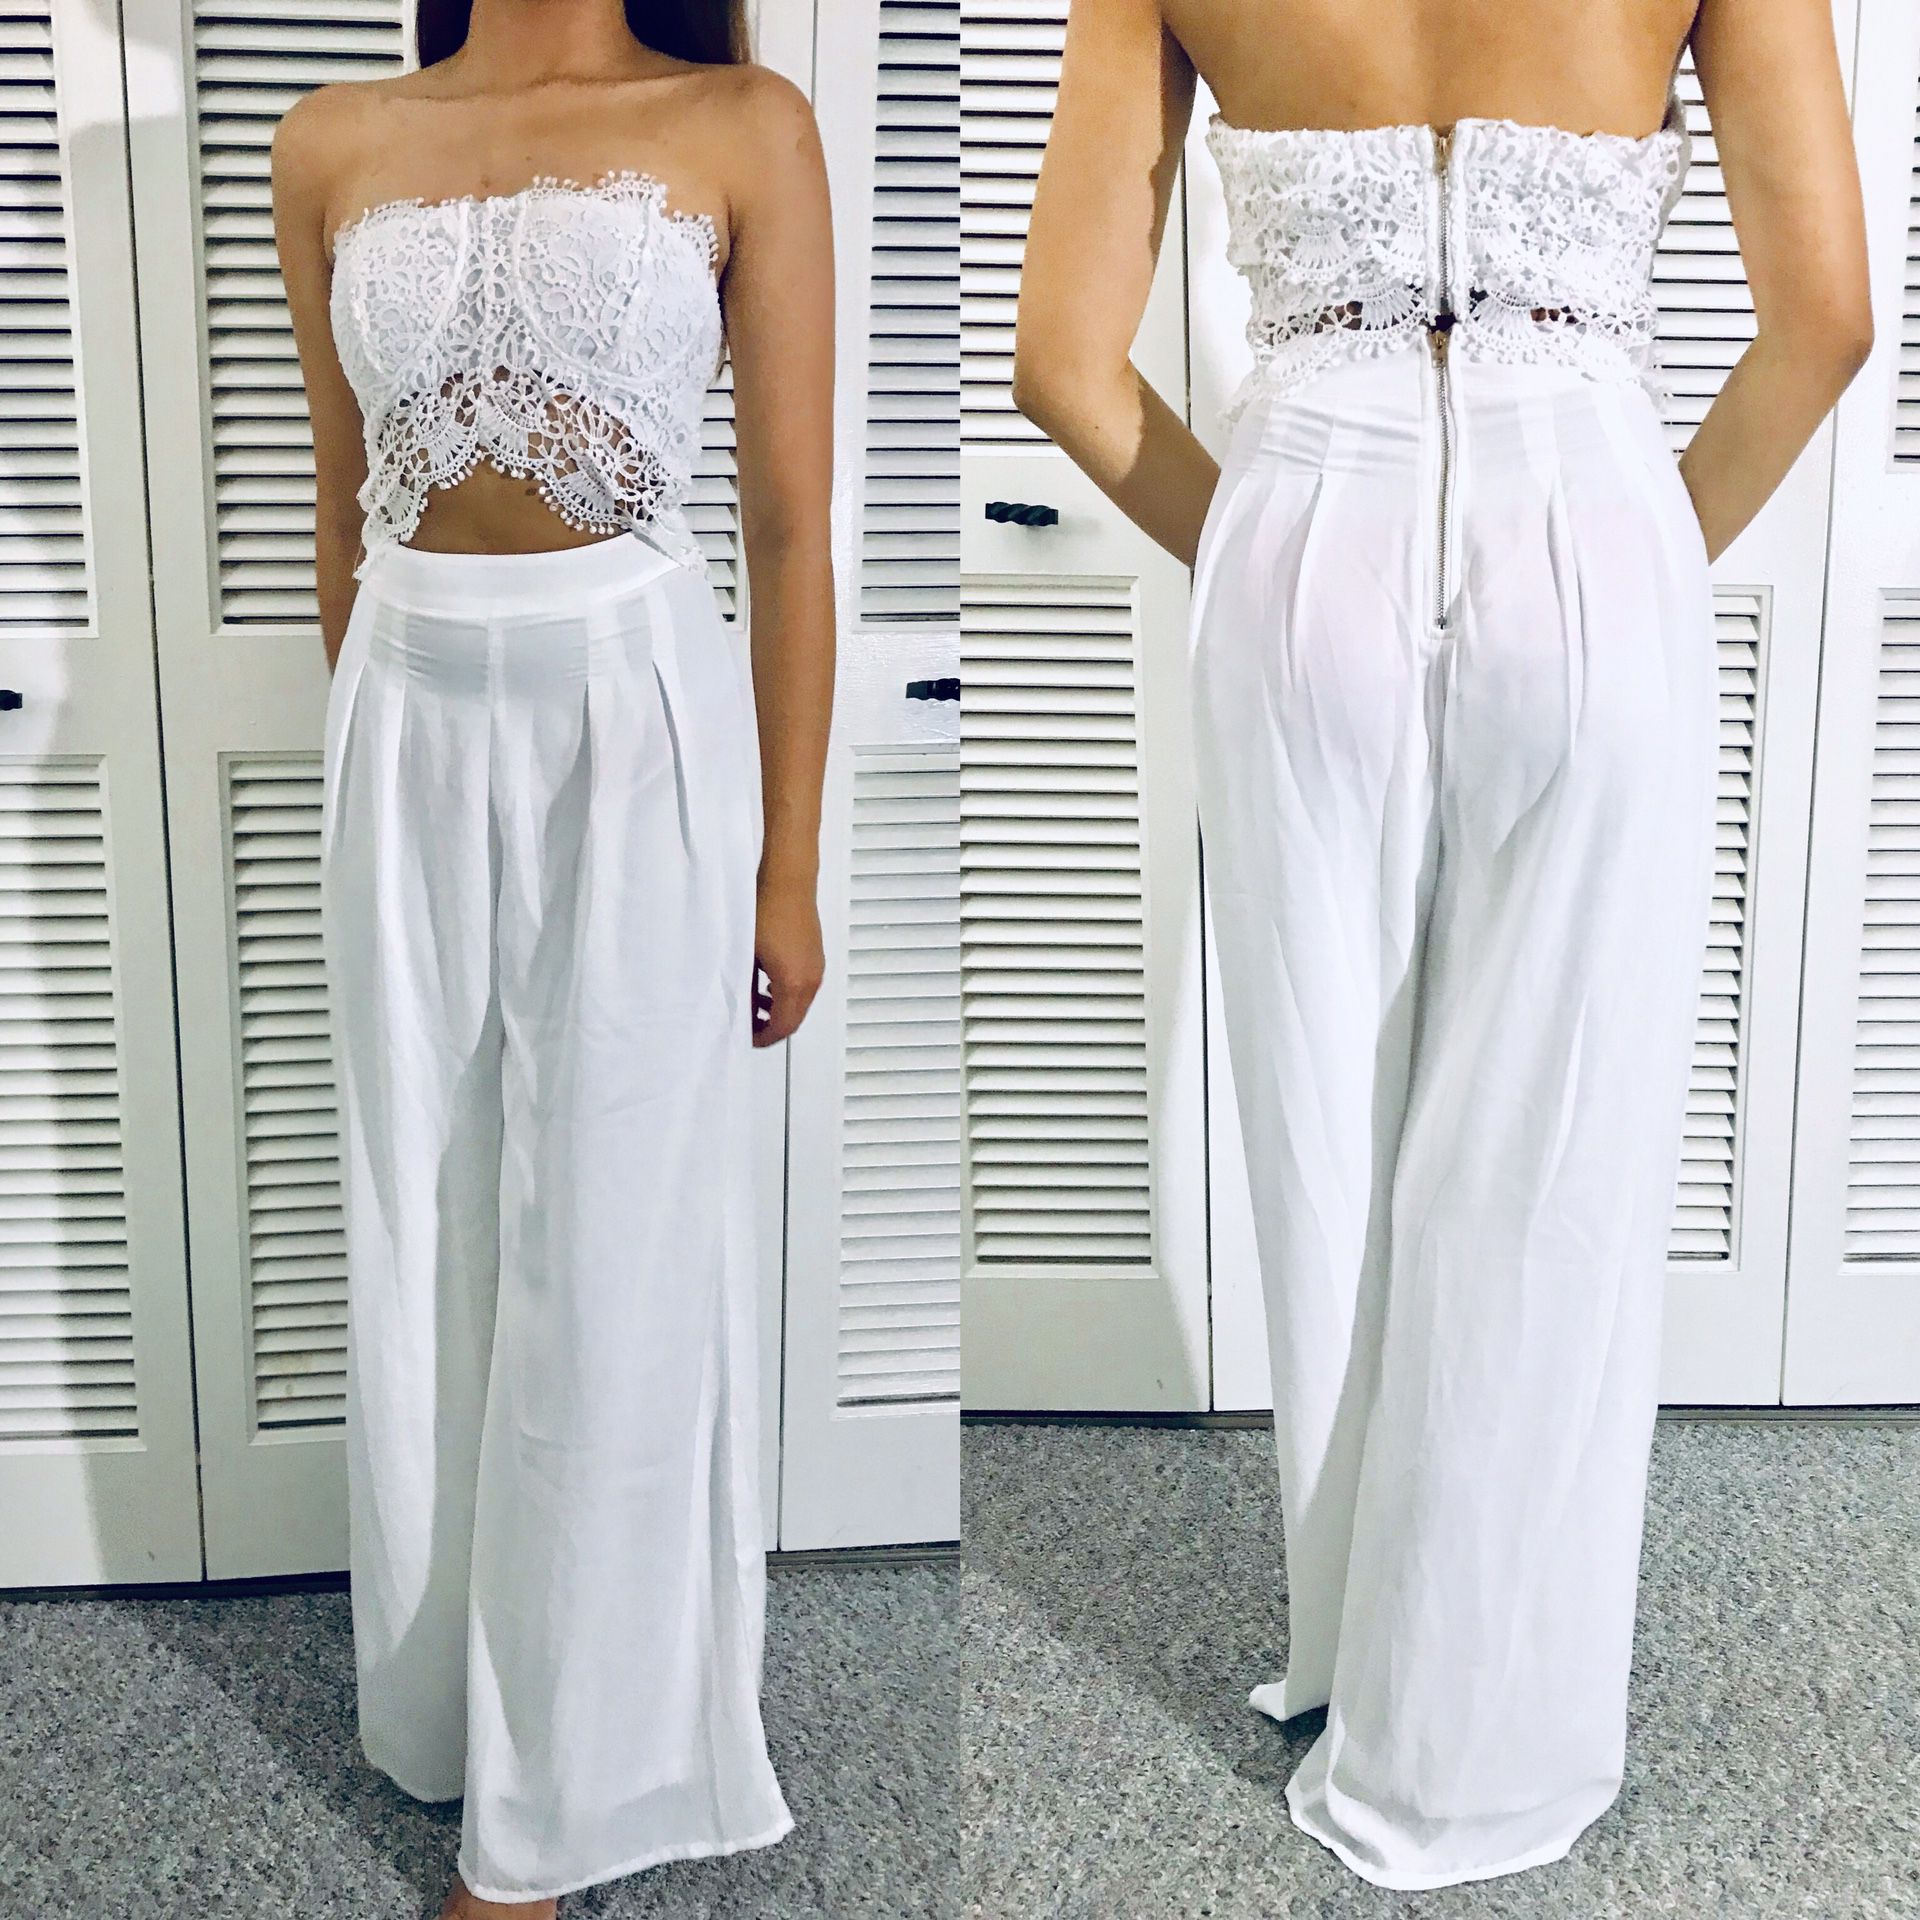 White Crochet Cut Out Jumpsuit Maxi Dress One Piece for Wedding or Wedding Guest dress or Date Night or Party